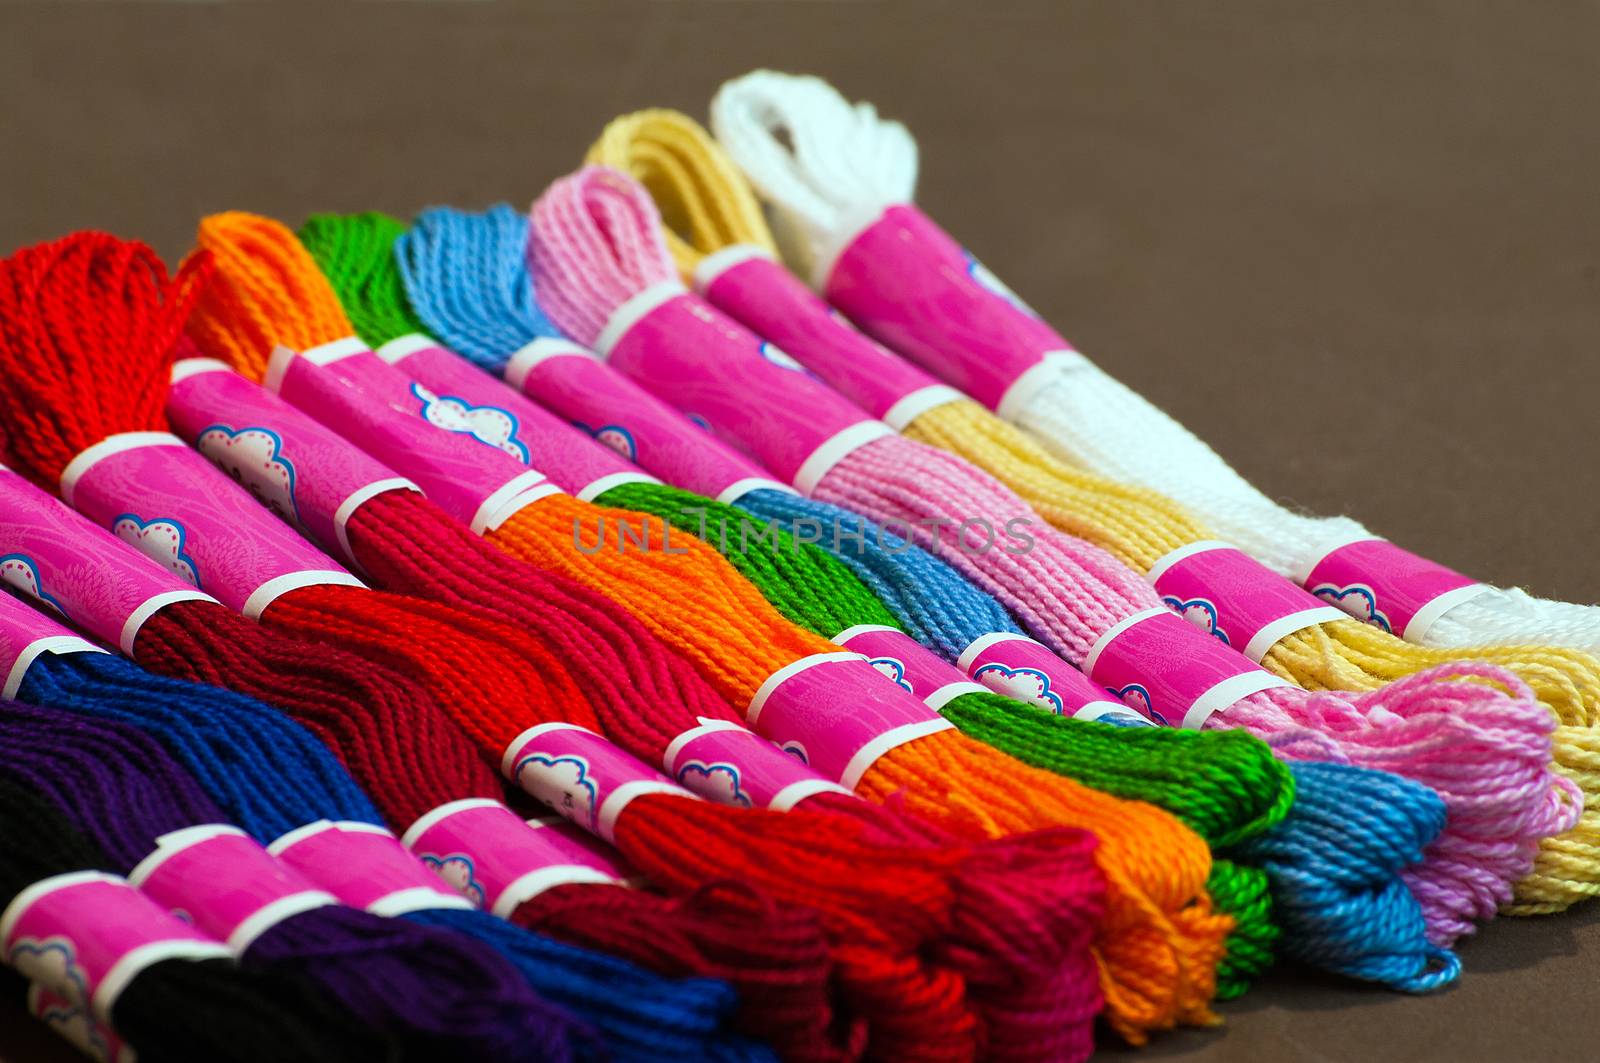 Multi-coloured embroidery floss in skein on plain background